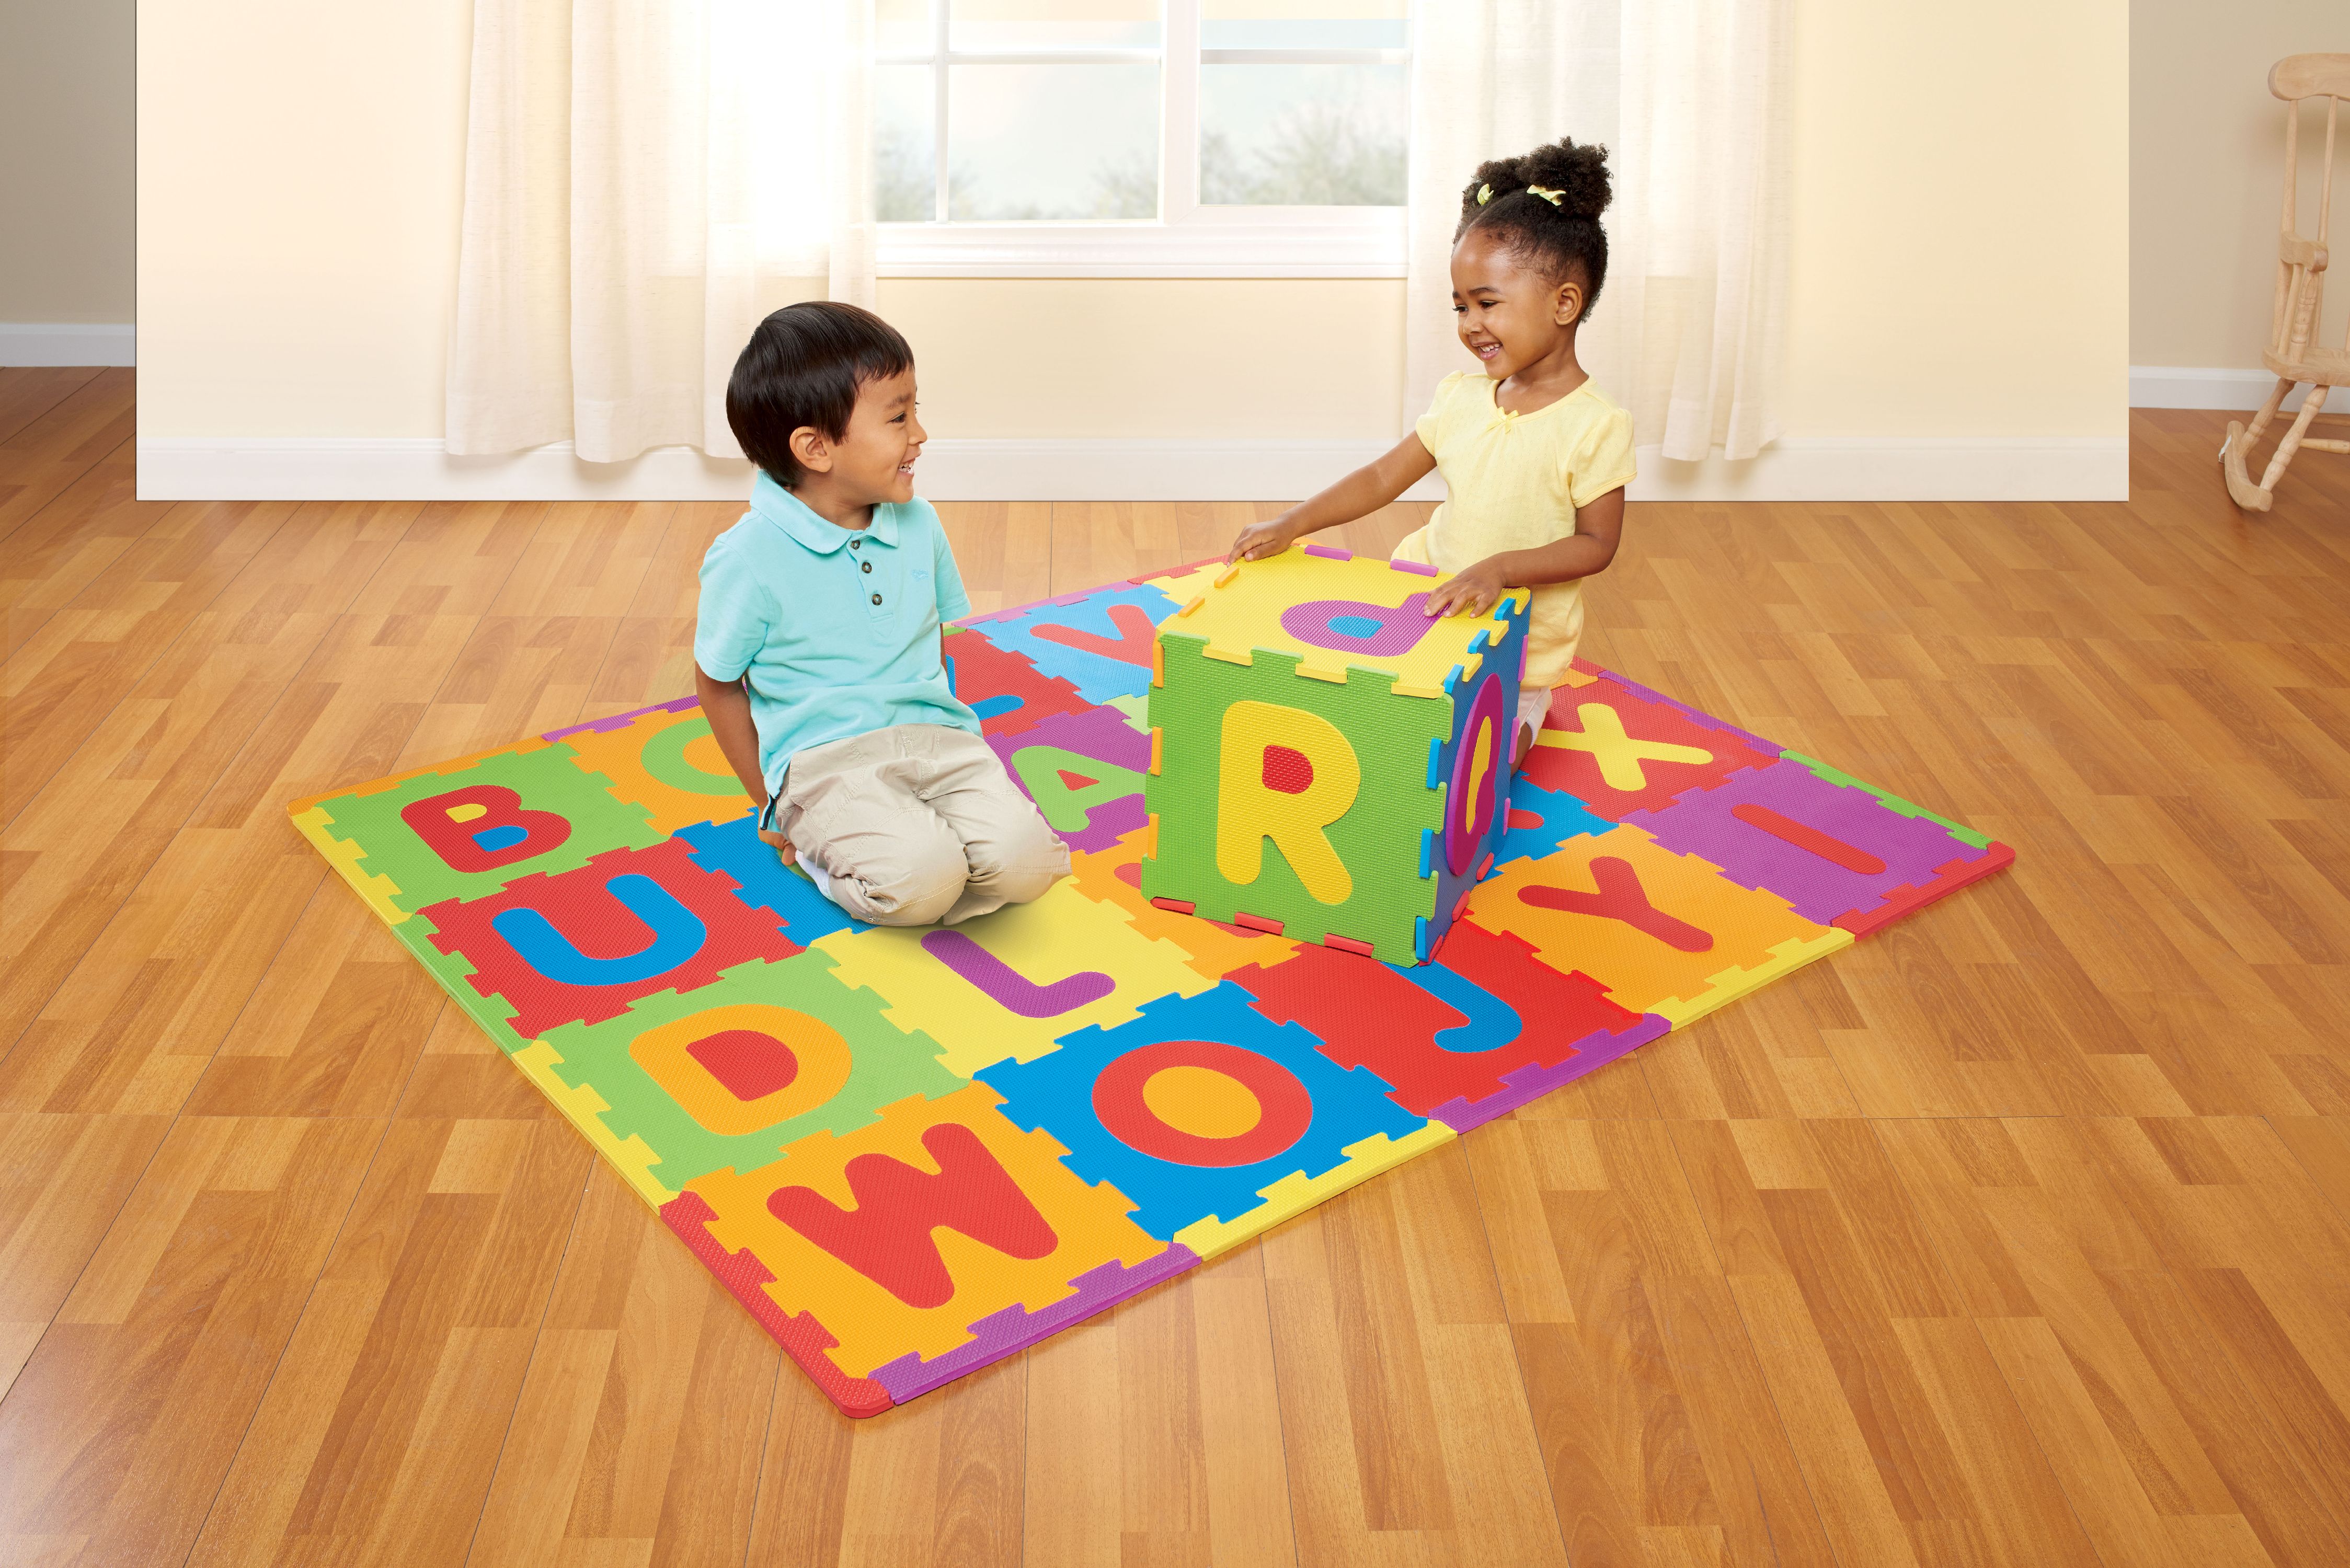 28-pieces Spark. Create. Imagine. ABC Foam Playmat Learning Toy Set $6.94 + Free store pick up at Walmart